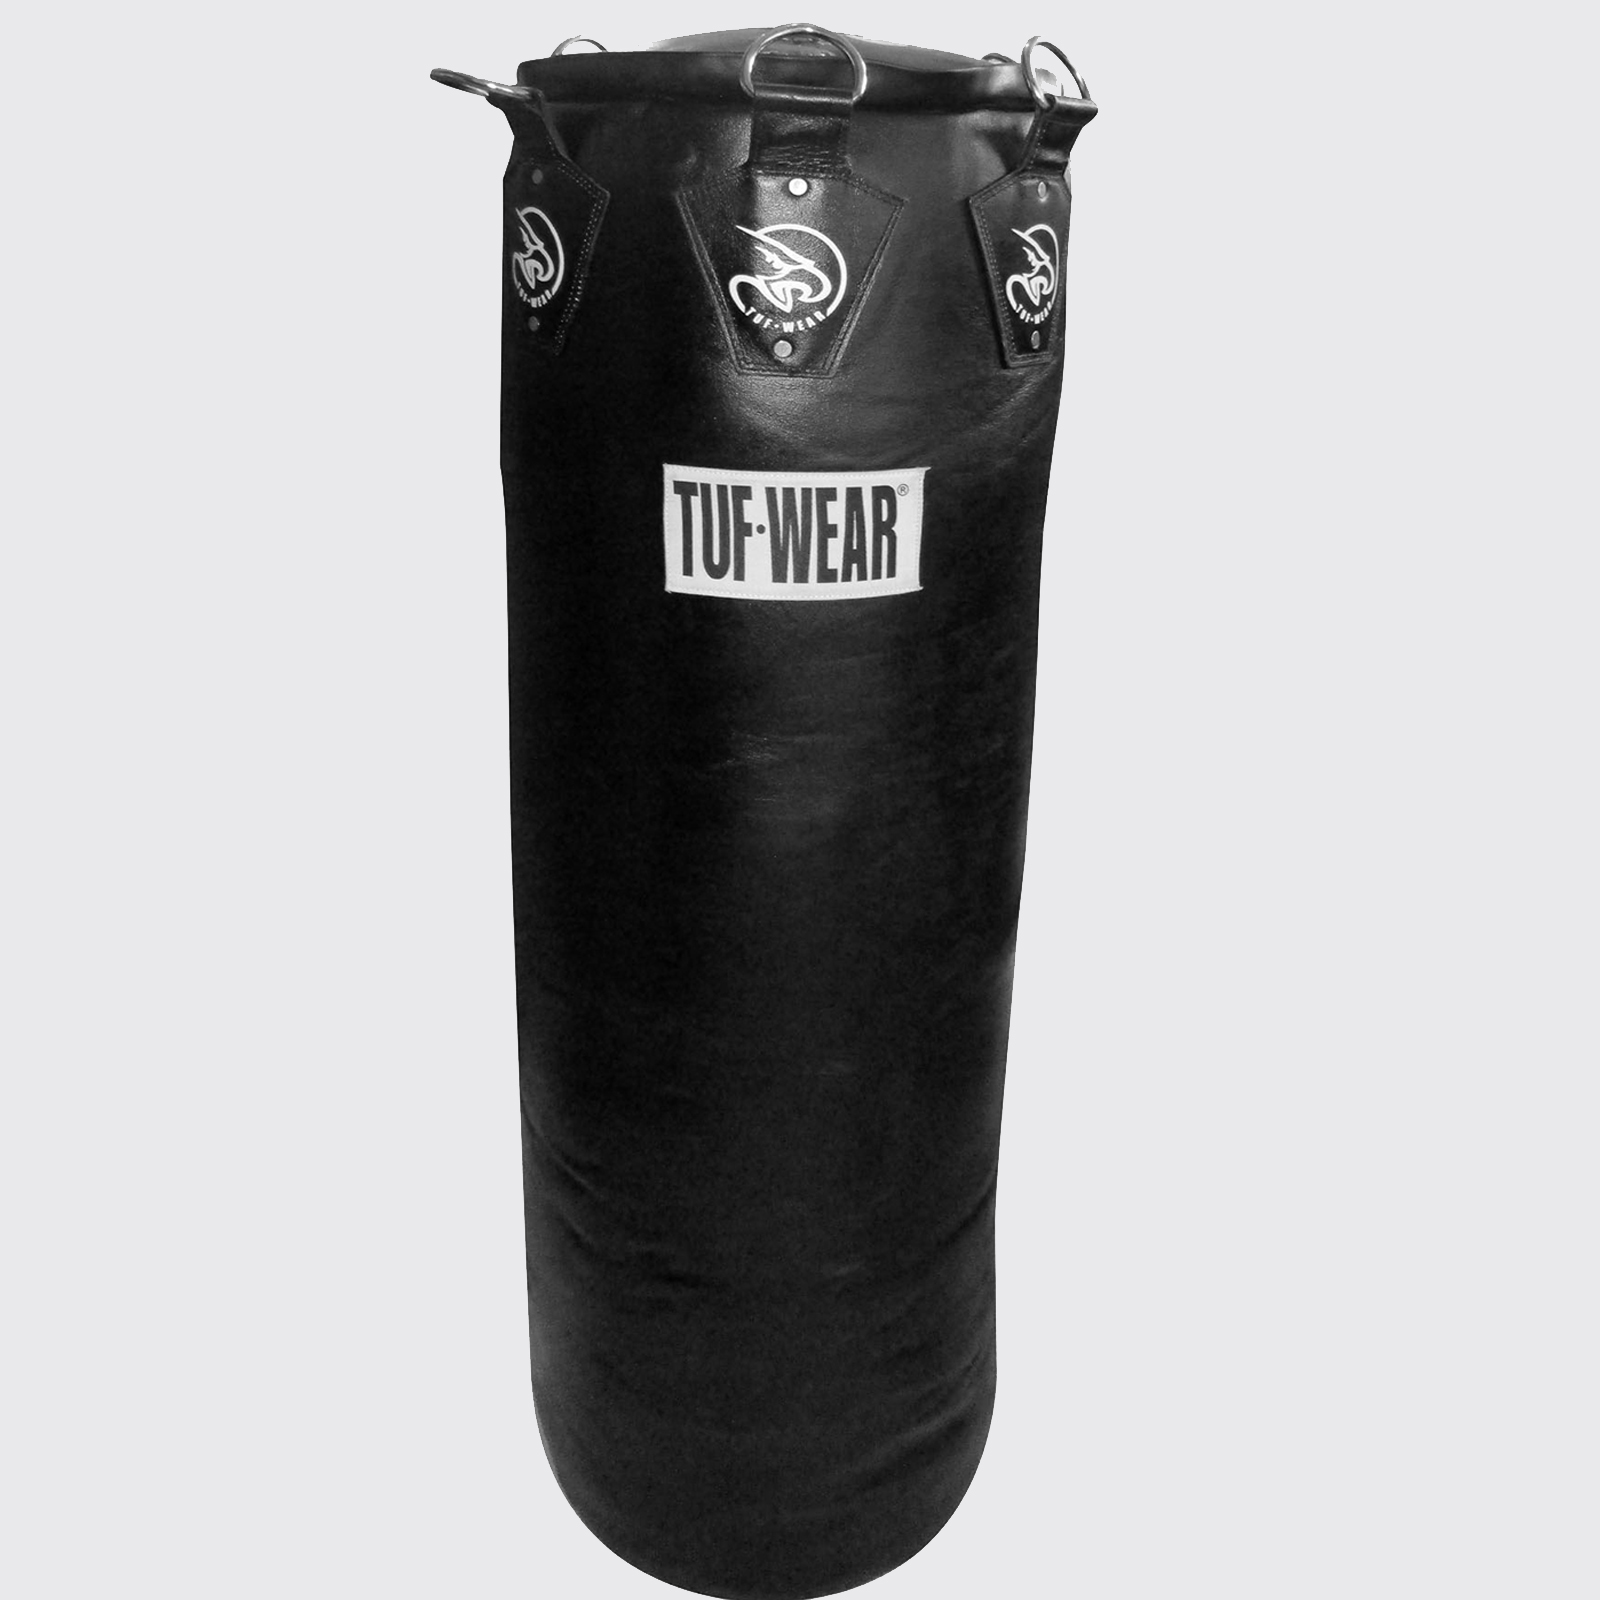 TUF WEAR Punchbag Boxing Quilted Classic Brown Leather Heavy Bag 